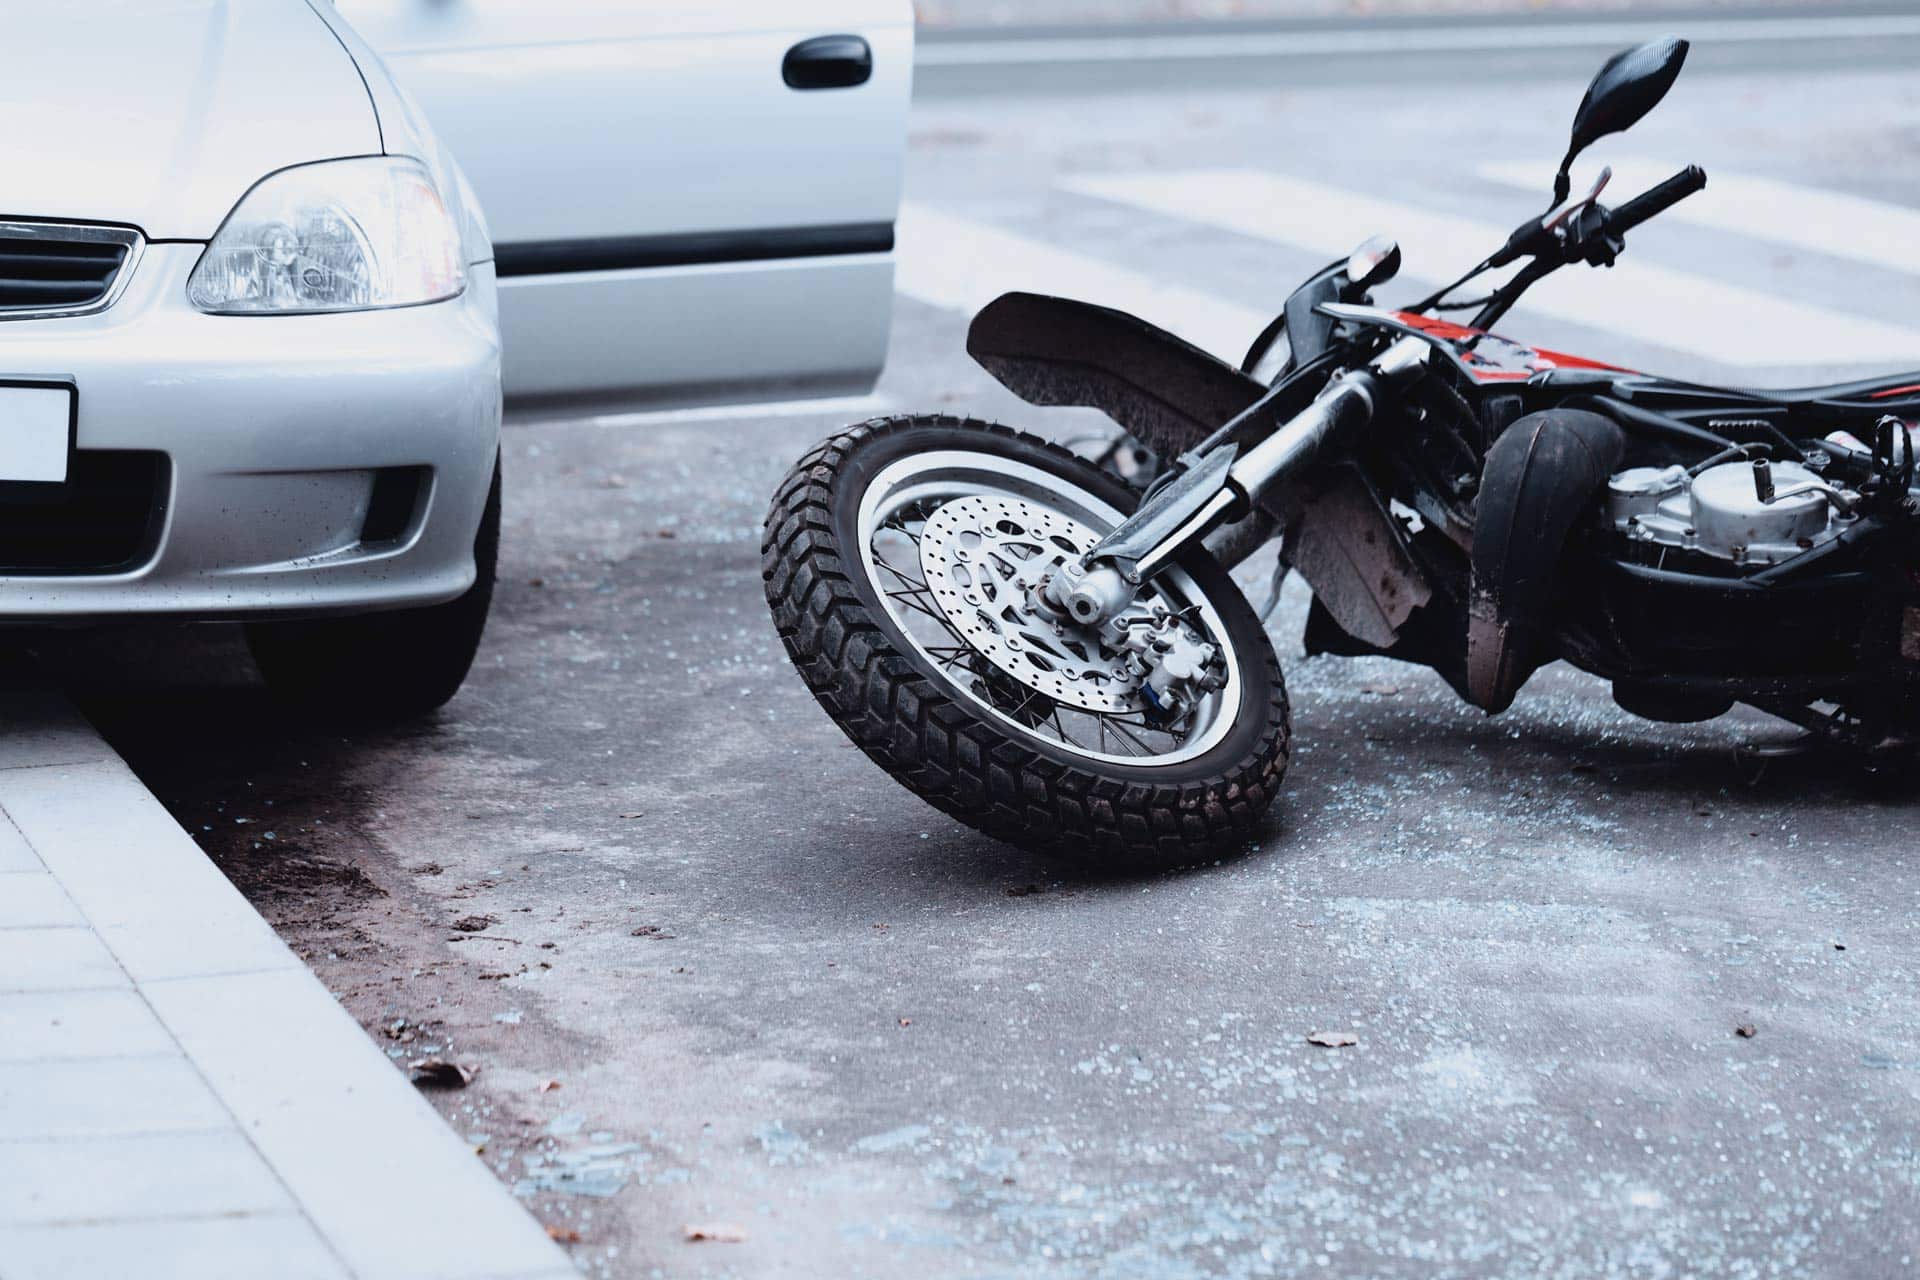 Motorcycle lying on the road and car standing with open door after a collision